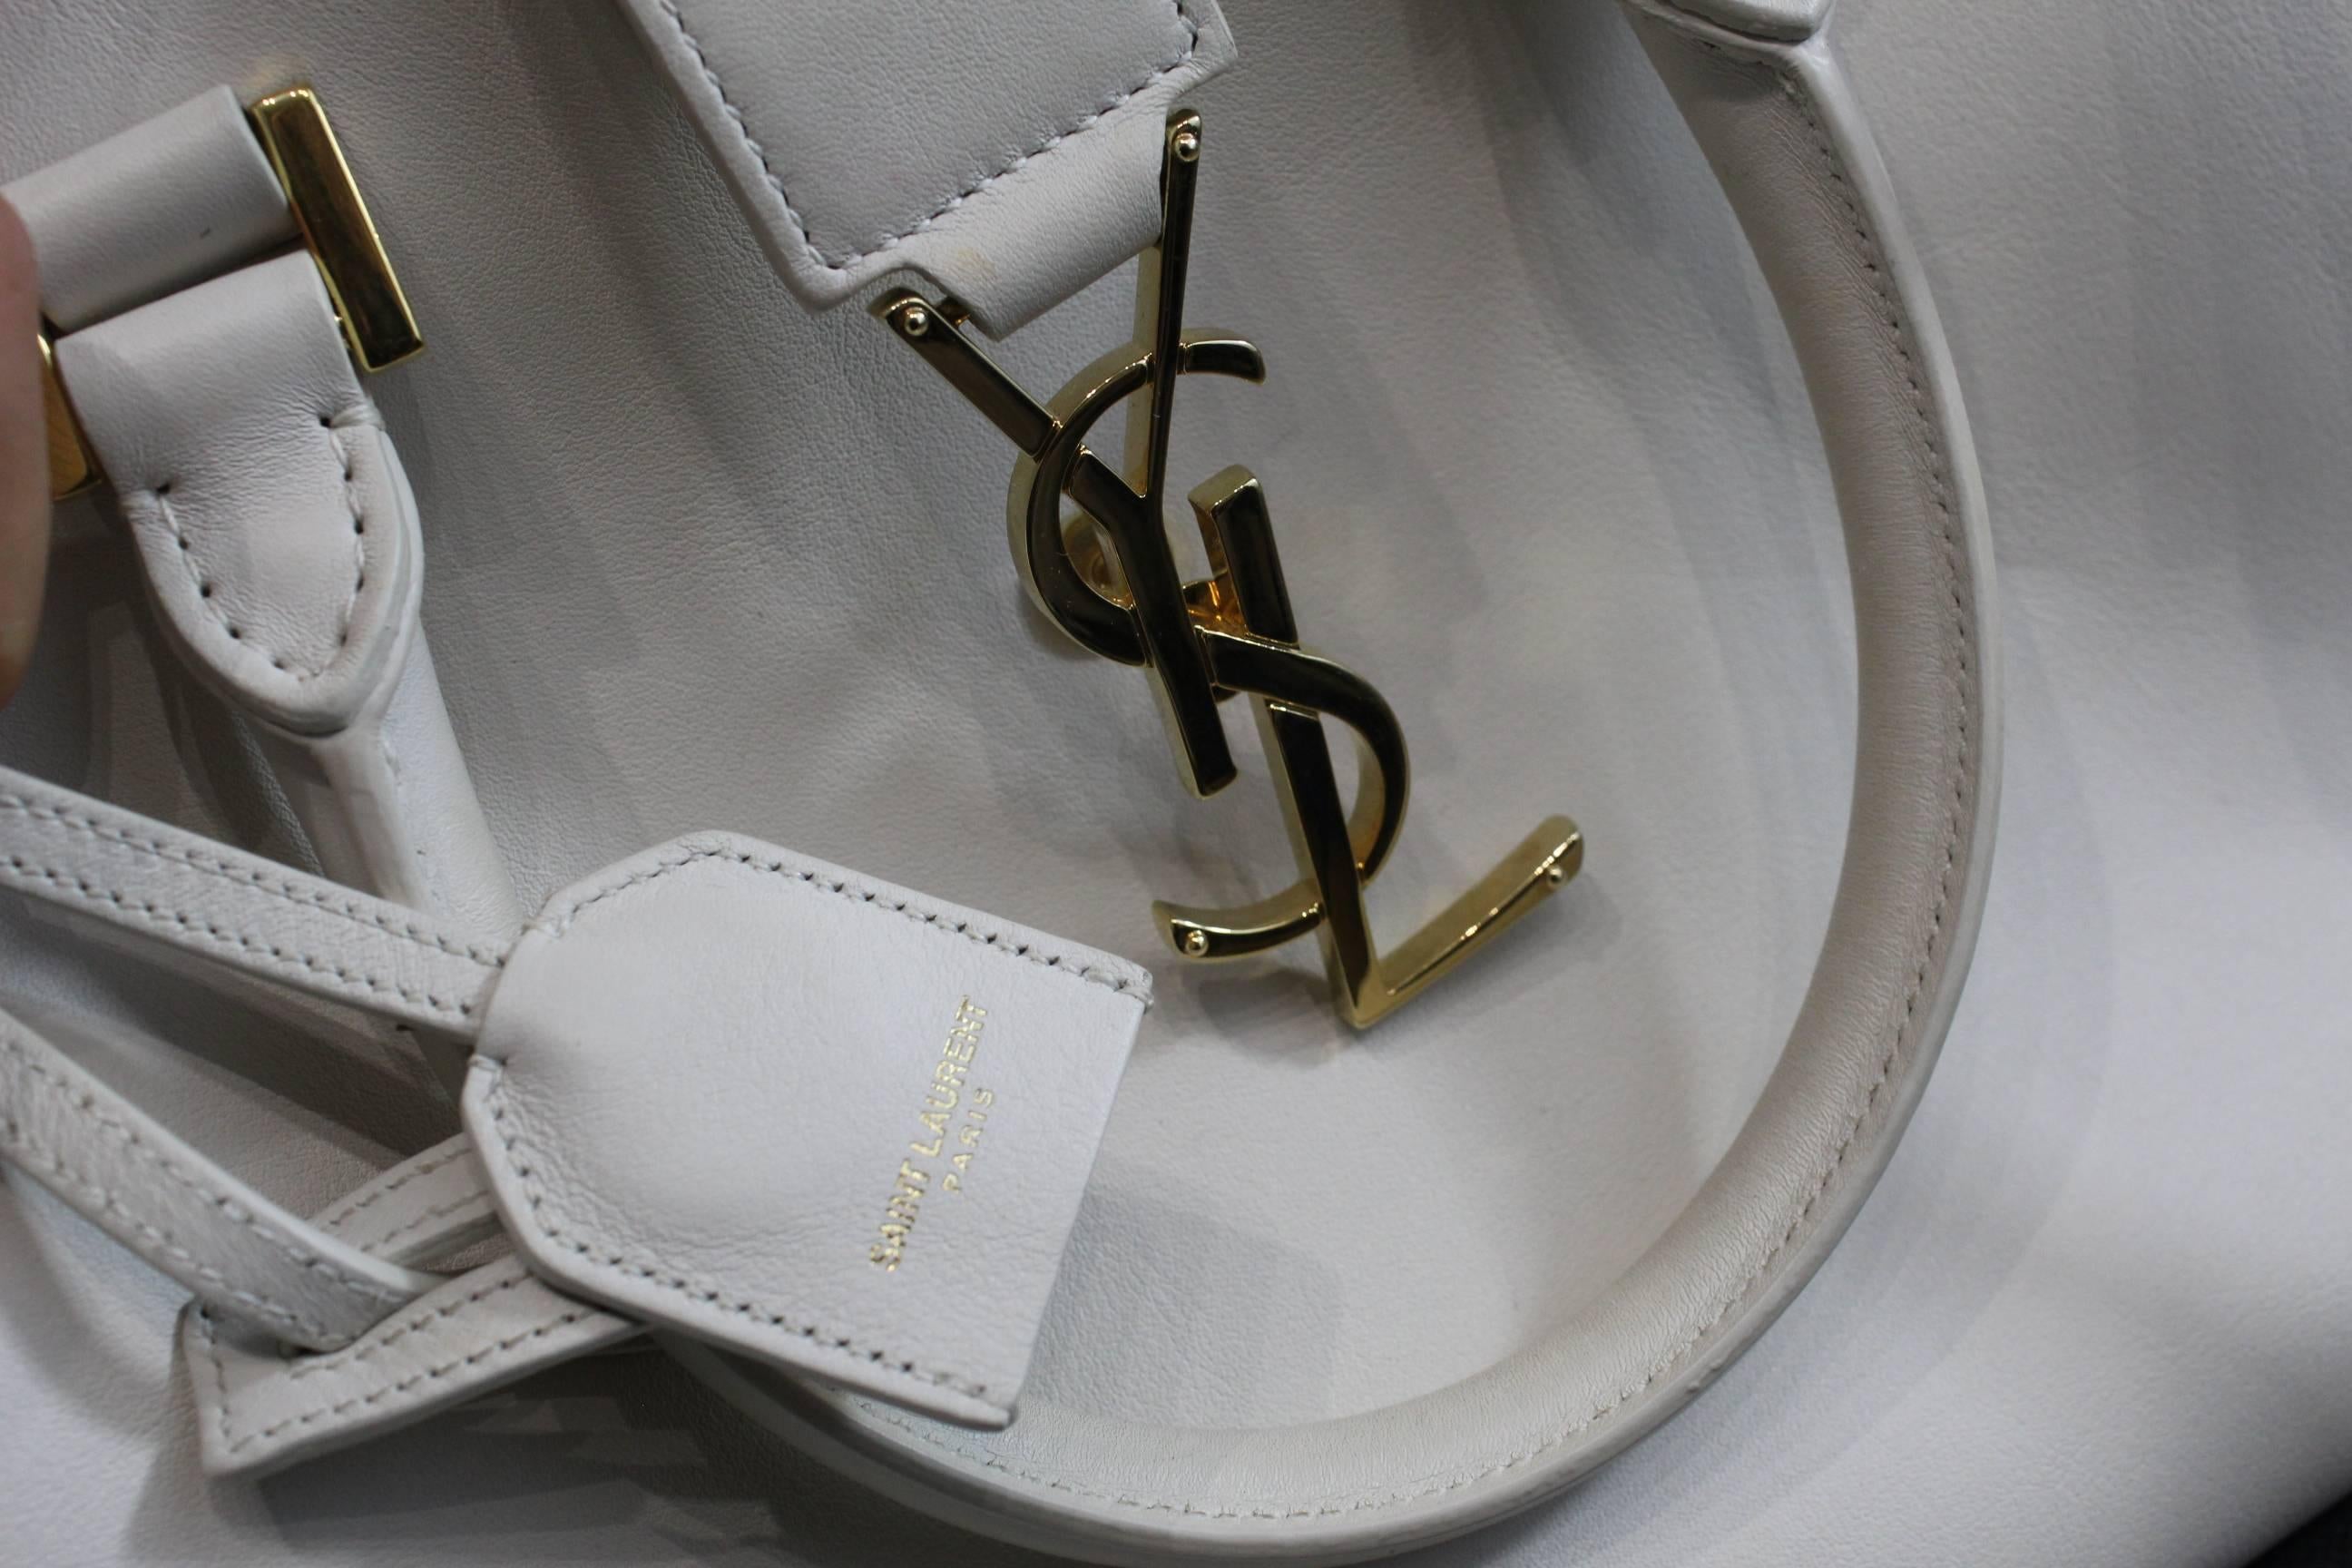 Relaly ncie bag from 2016 from YSL in white leather.

Sold with dust ba

Removable strap.

Good condition, just some minor signs of wear.